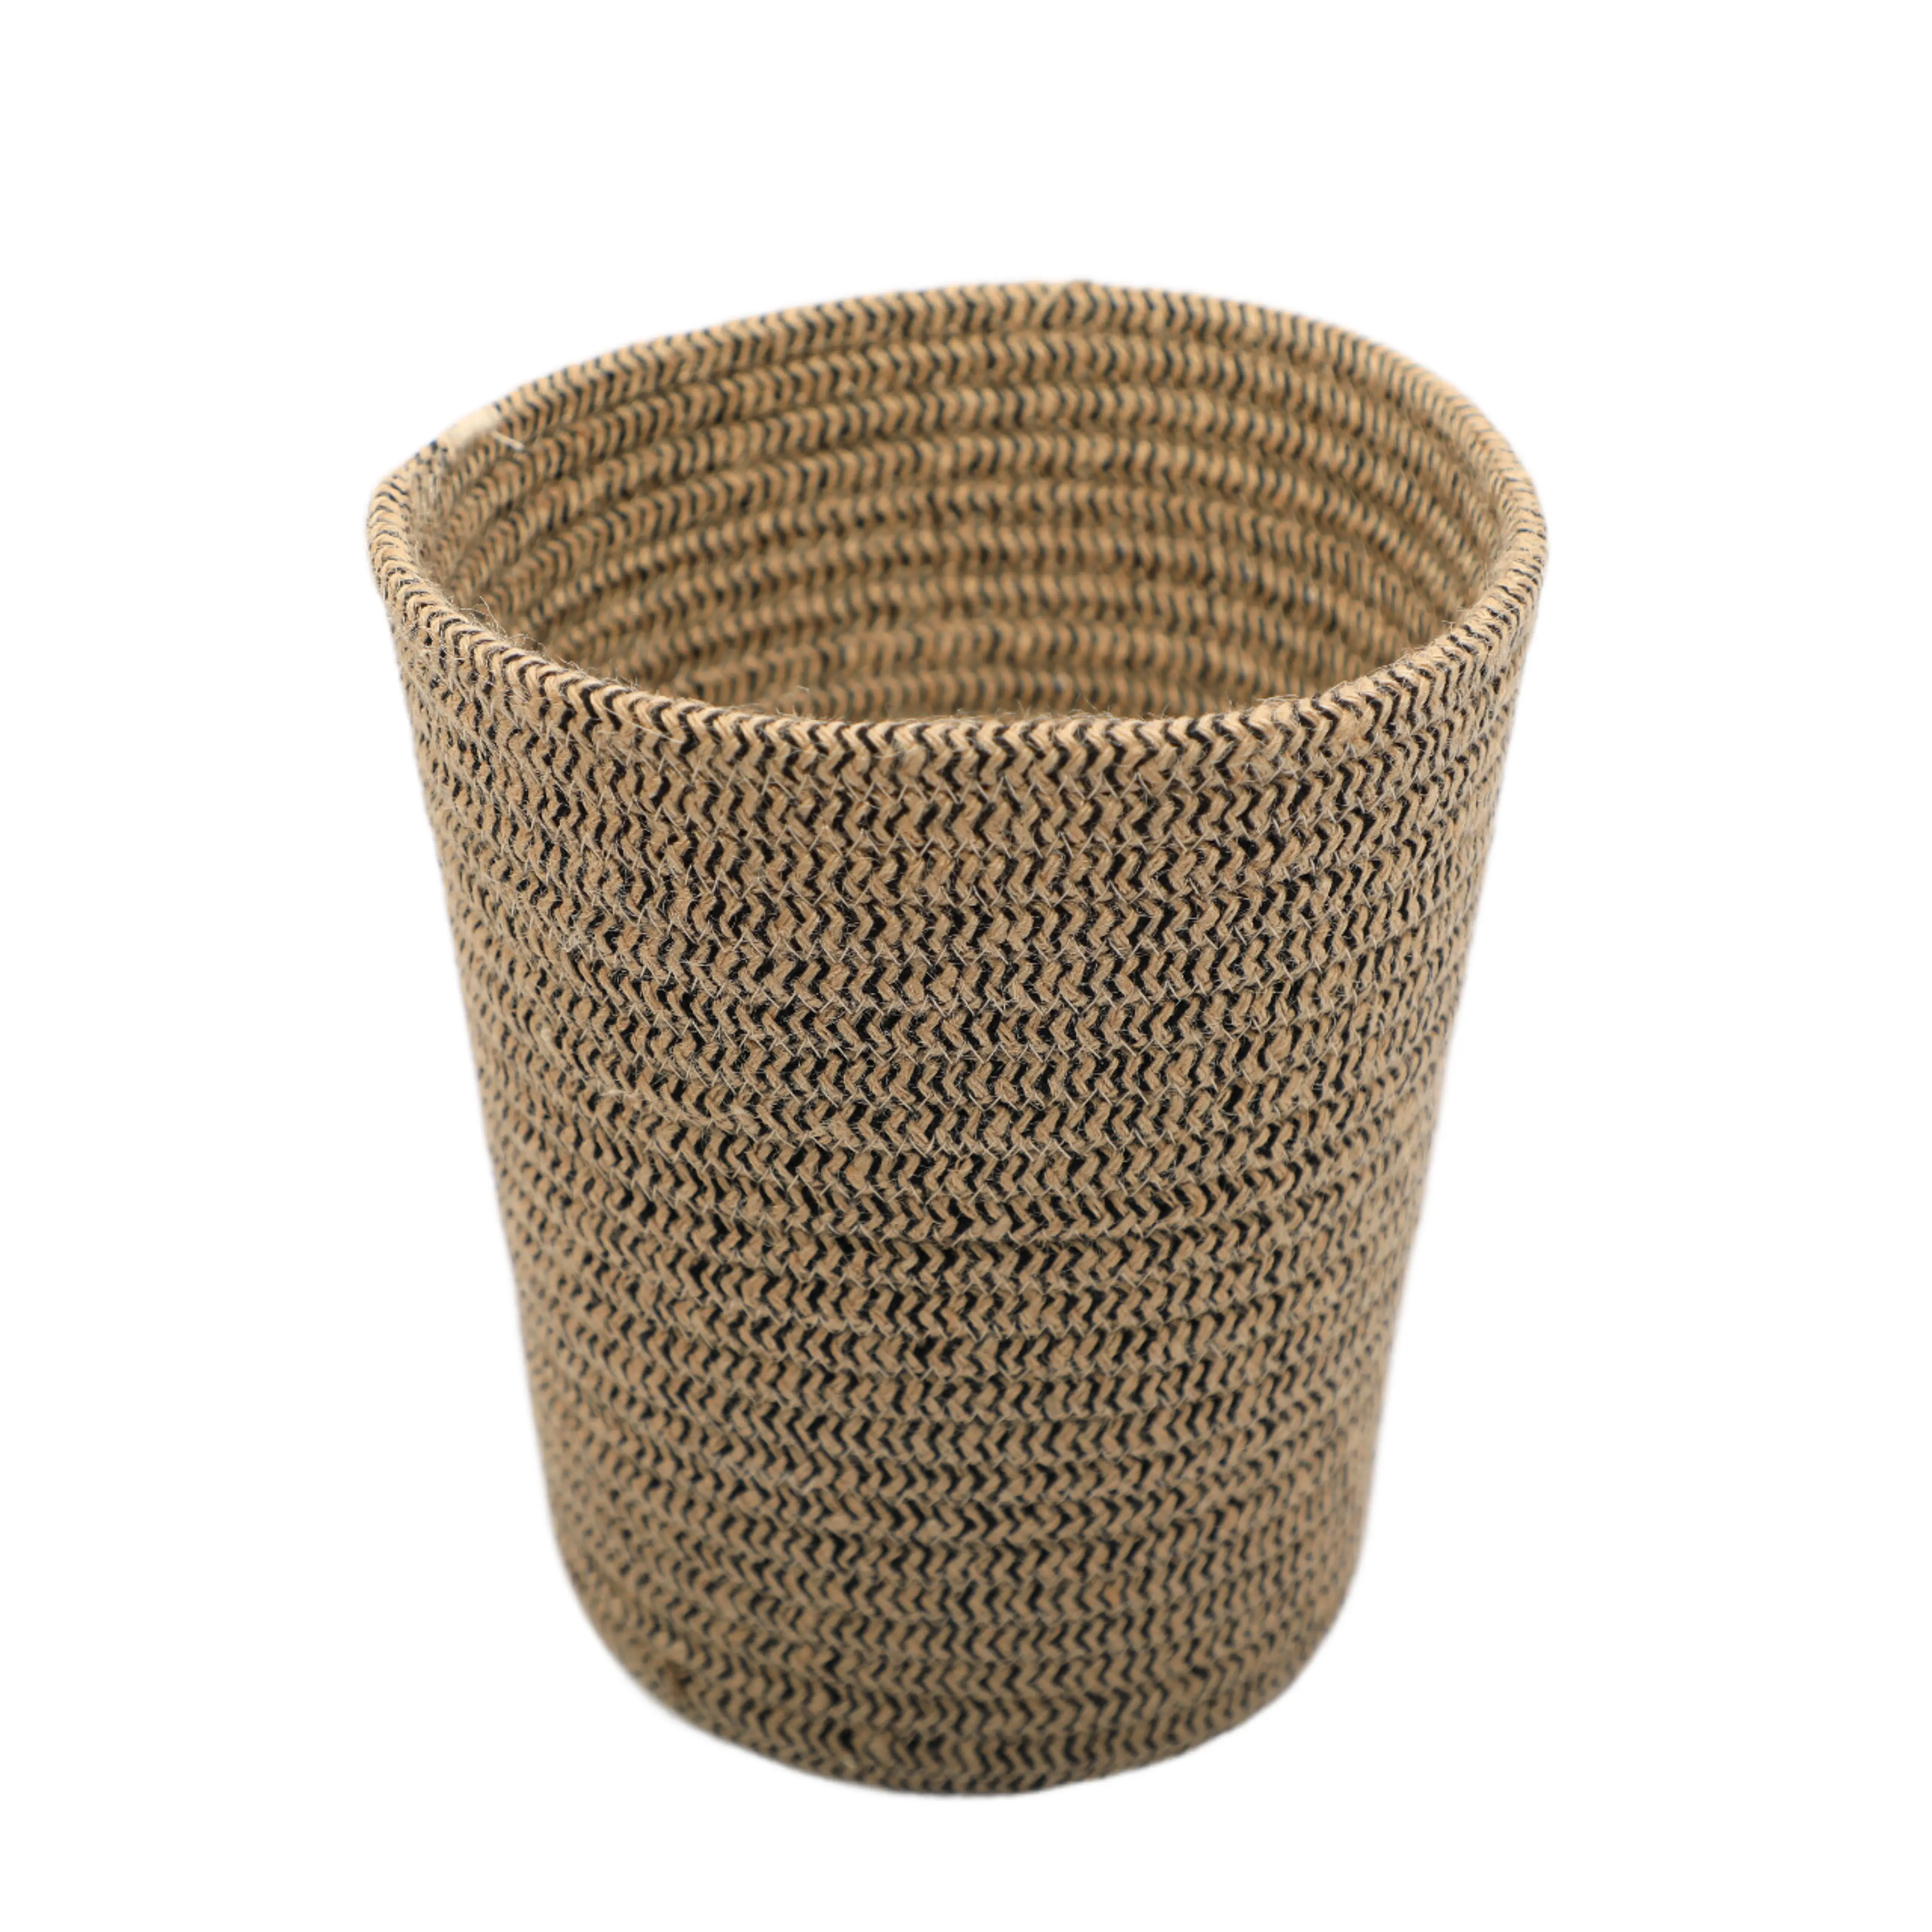 Indoor practical Knitted Storage Cotton Rope Basket Extra Large Convenient collection Cotton Rope Basket